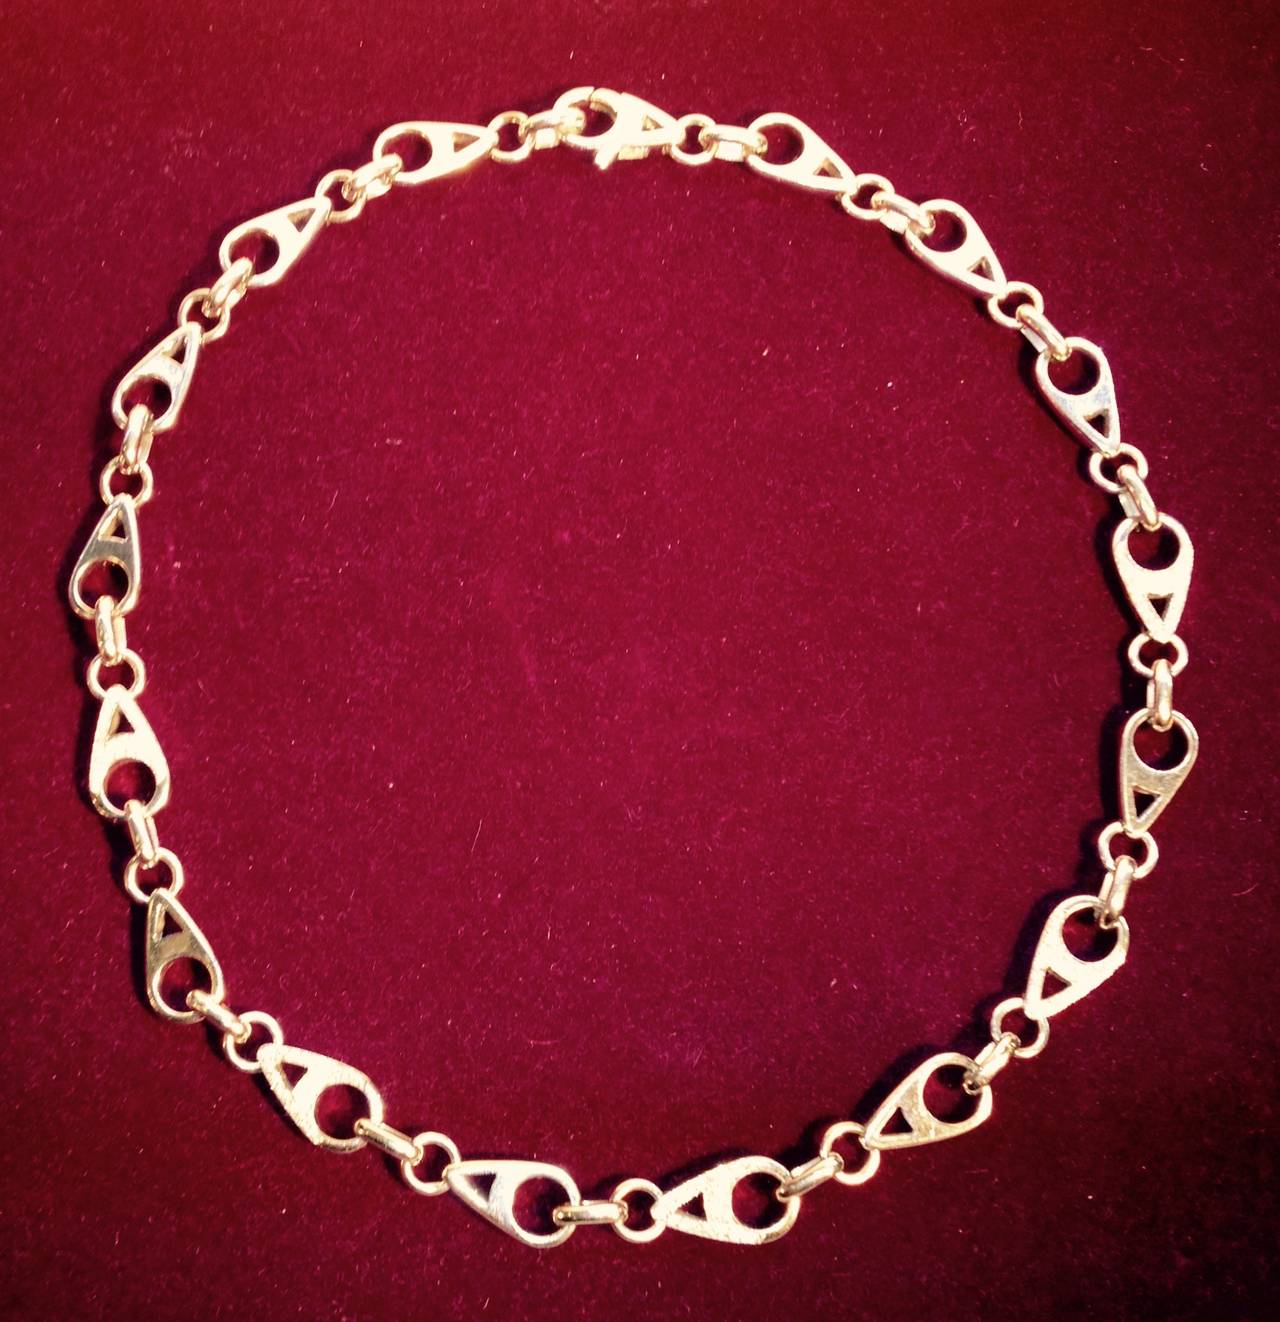 18KT White Gold And Diamond 1980's, Heavy Teardrop Shaped Link Chain Necklace, Designed By Asprey, Made In England, Total Diamond Weight Is Approximately 1.50 Cts. Of Very High Quality, Full Cut Diamonds, Featuring An Easy Lobster Claw Closure.